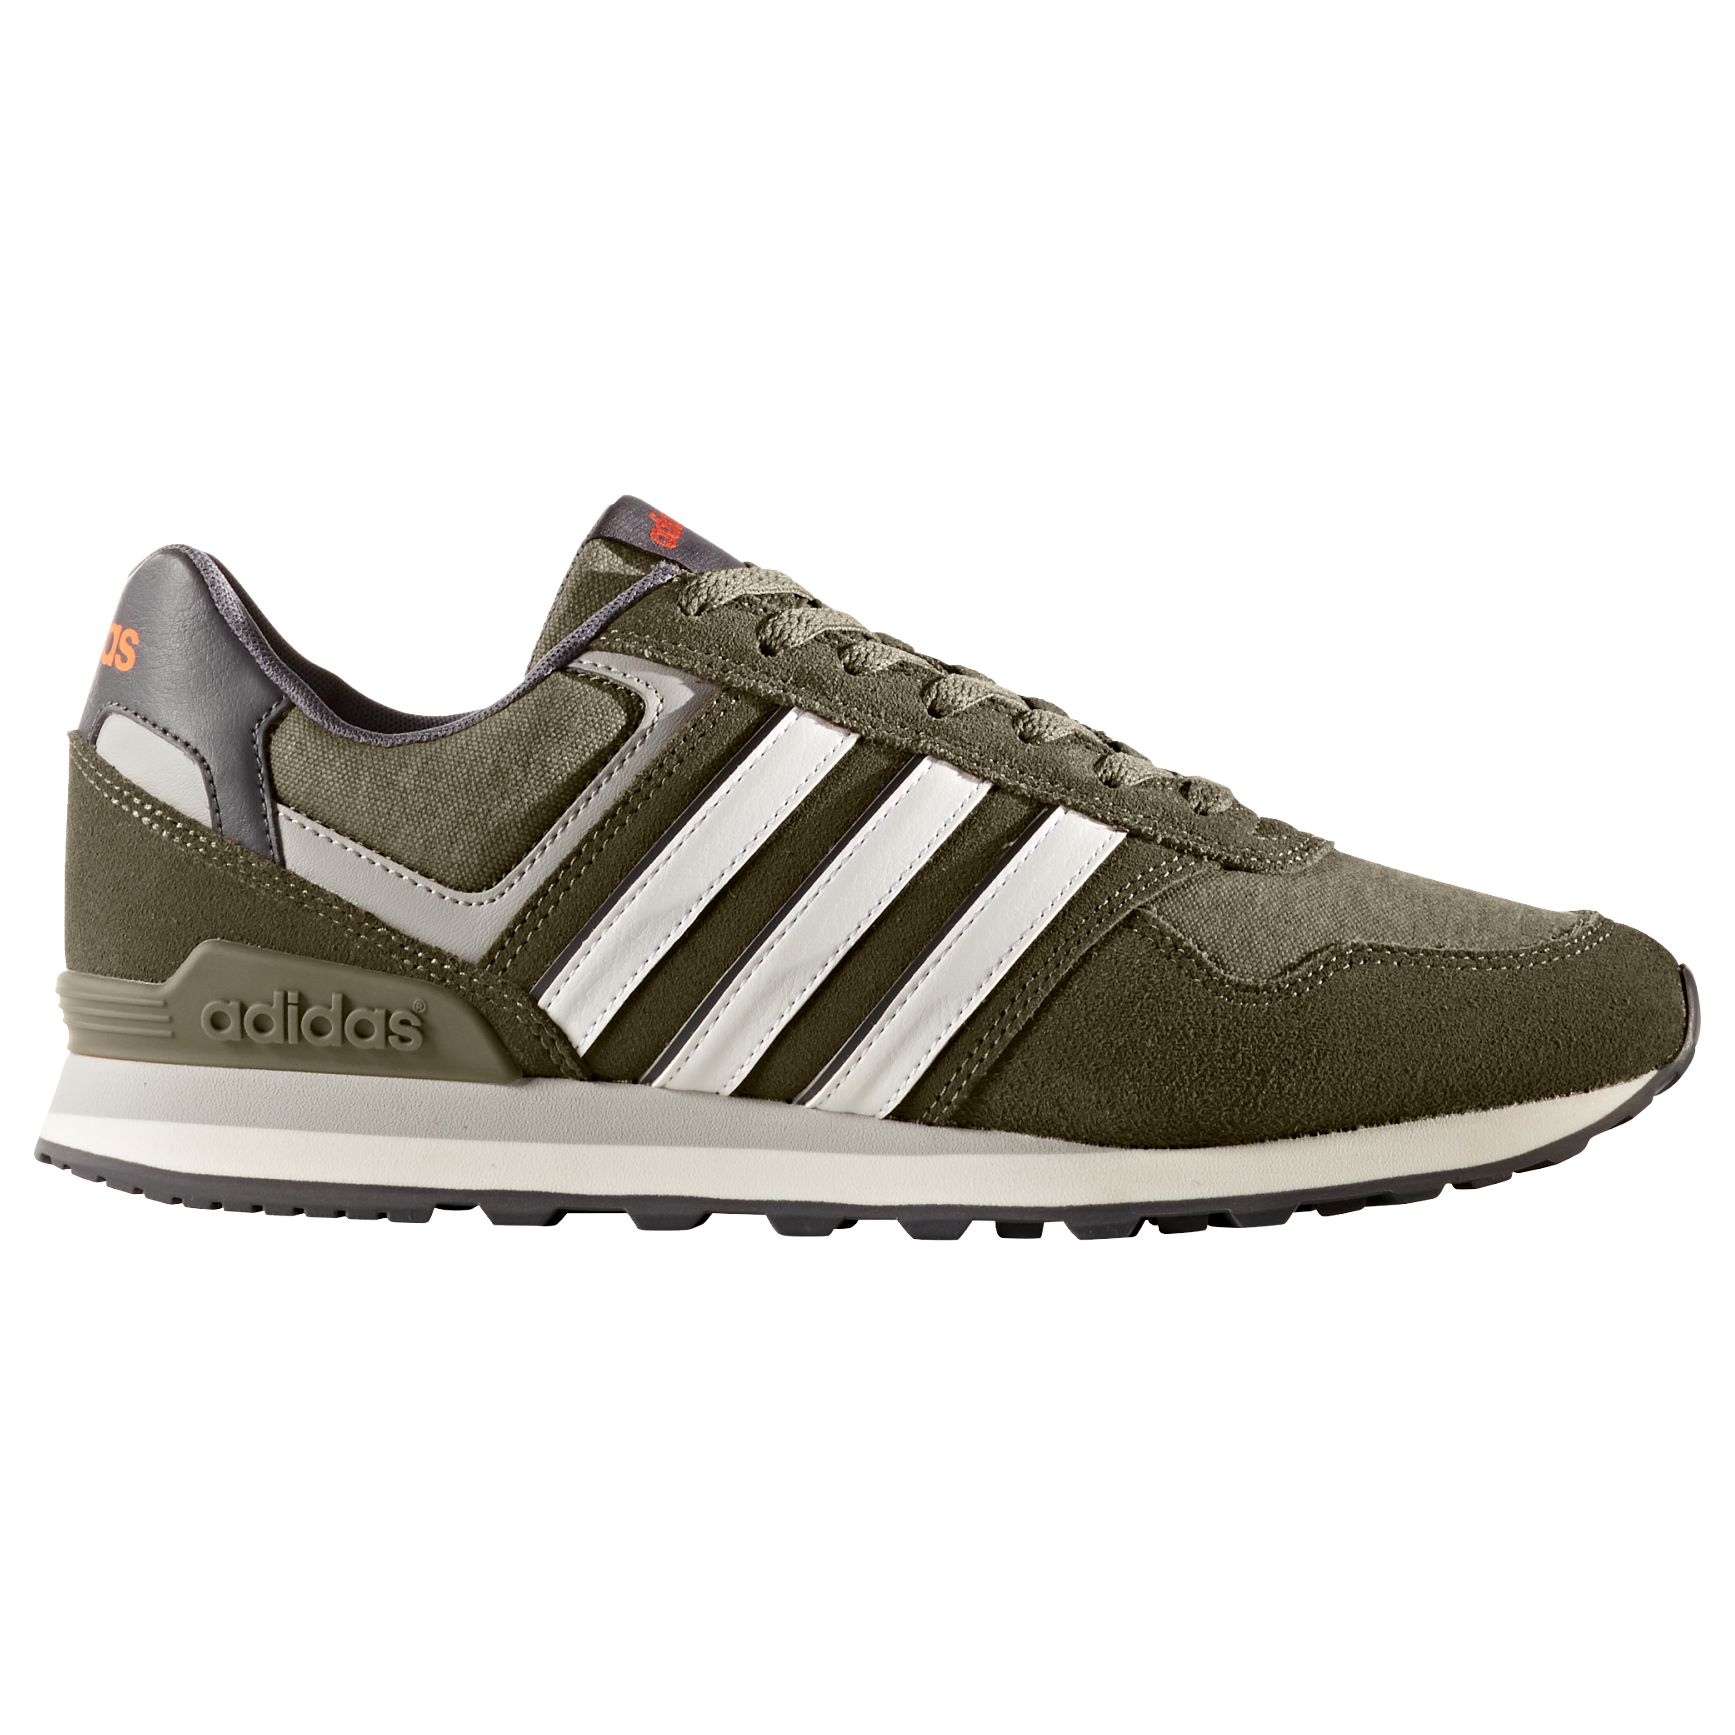 adidas Neo 10K Casual Men's Trainers